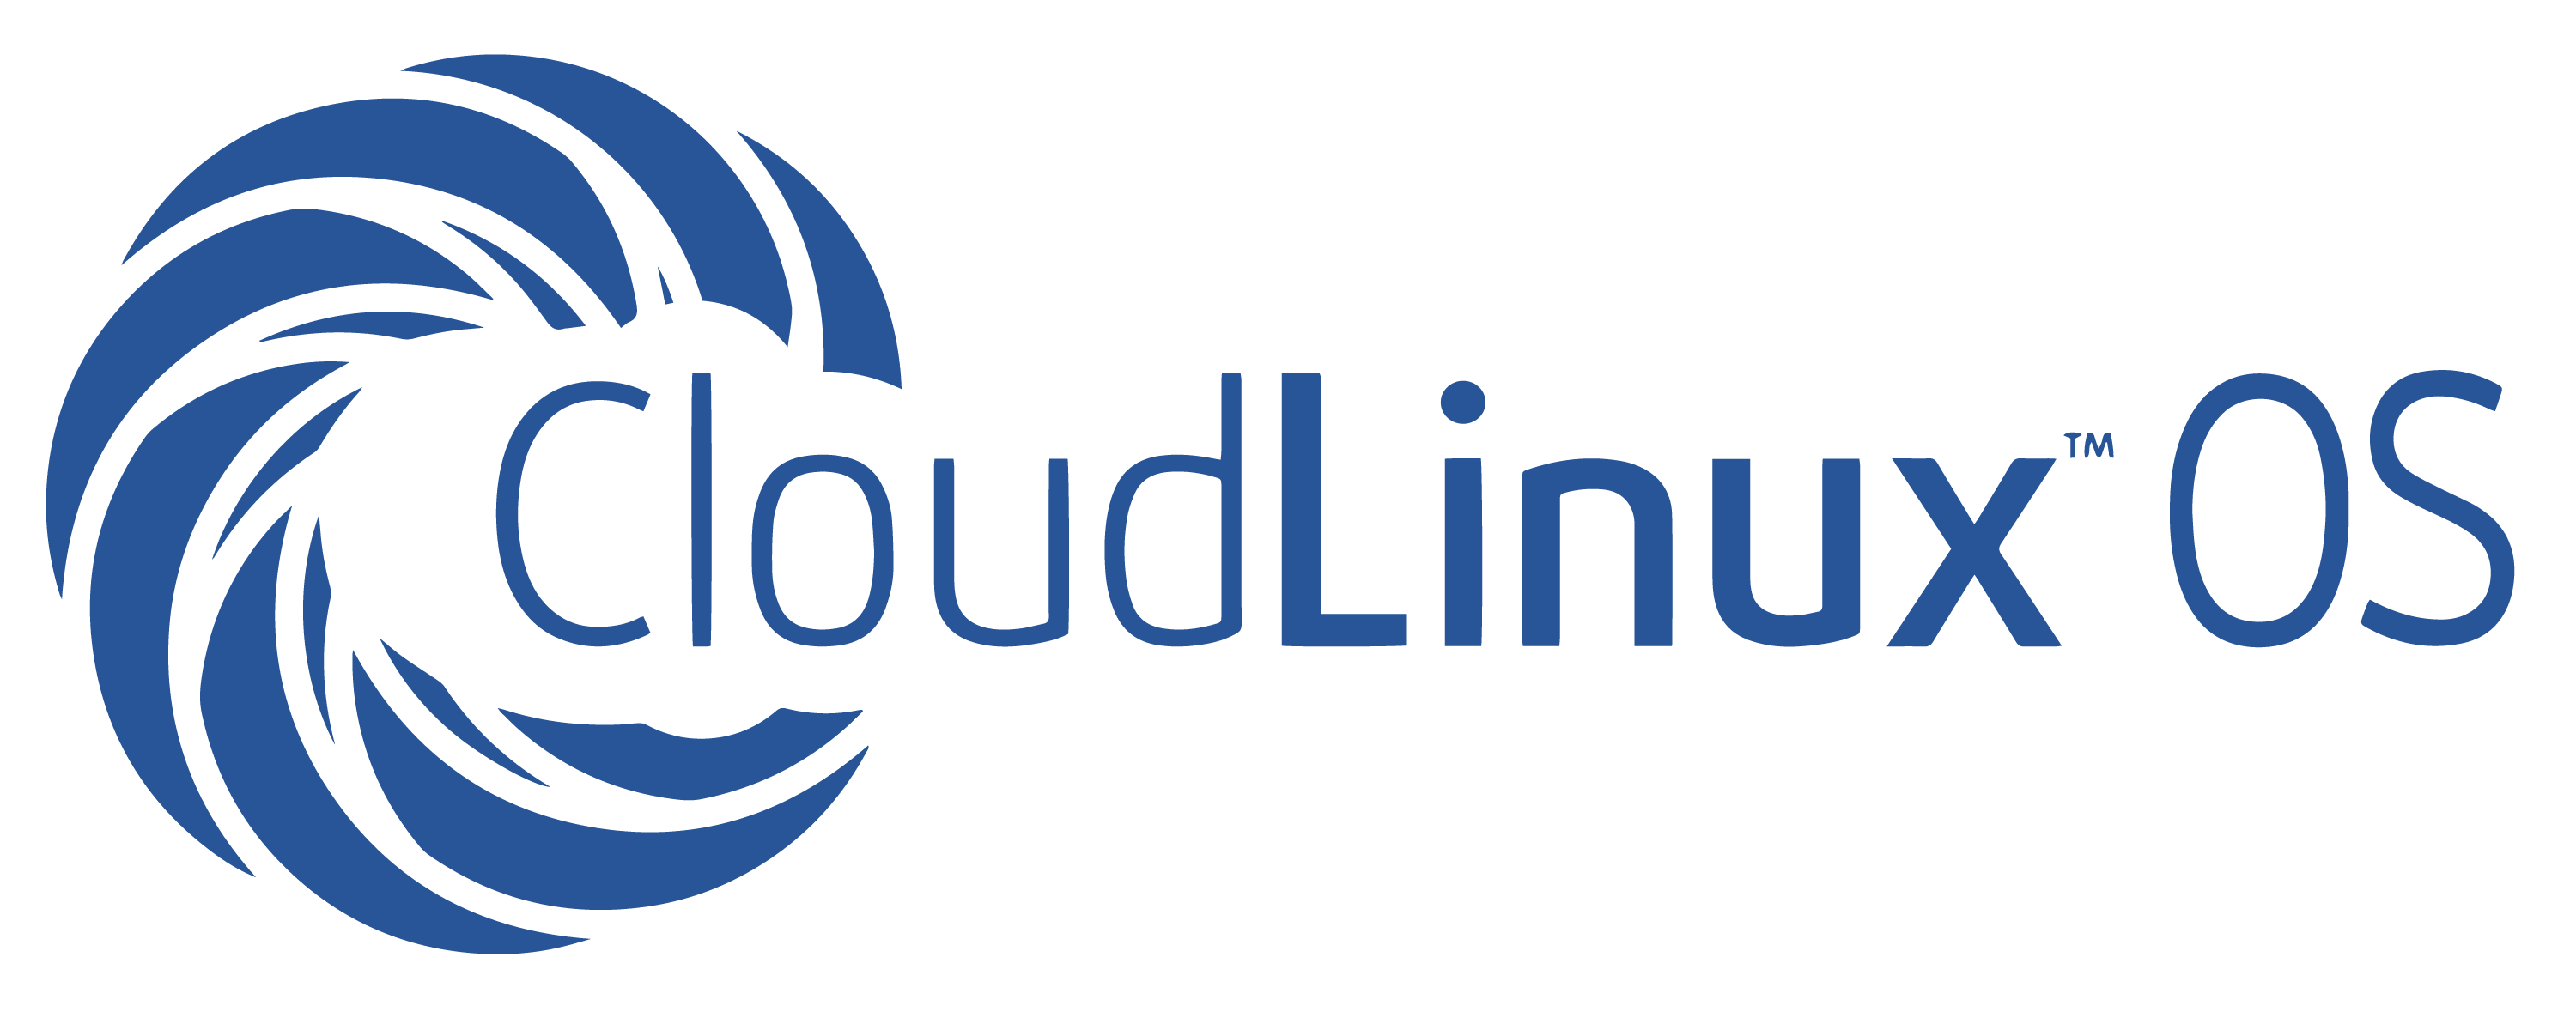 Cloudlinux os